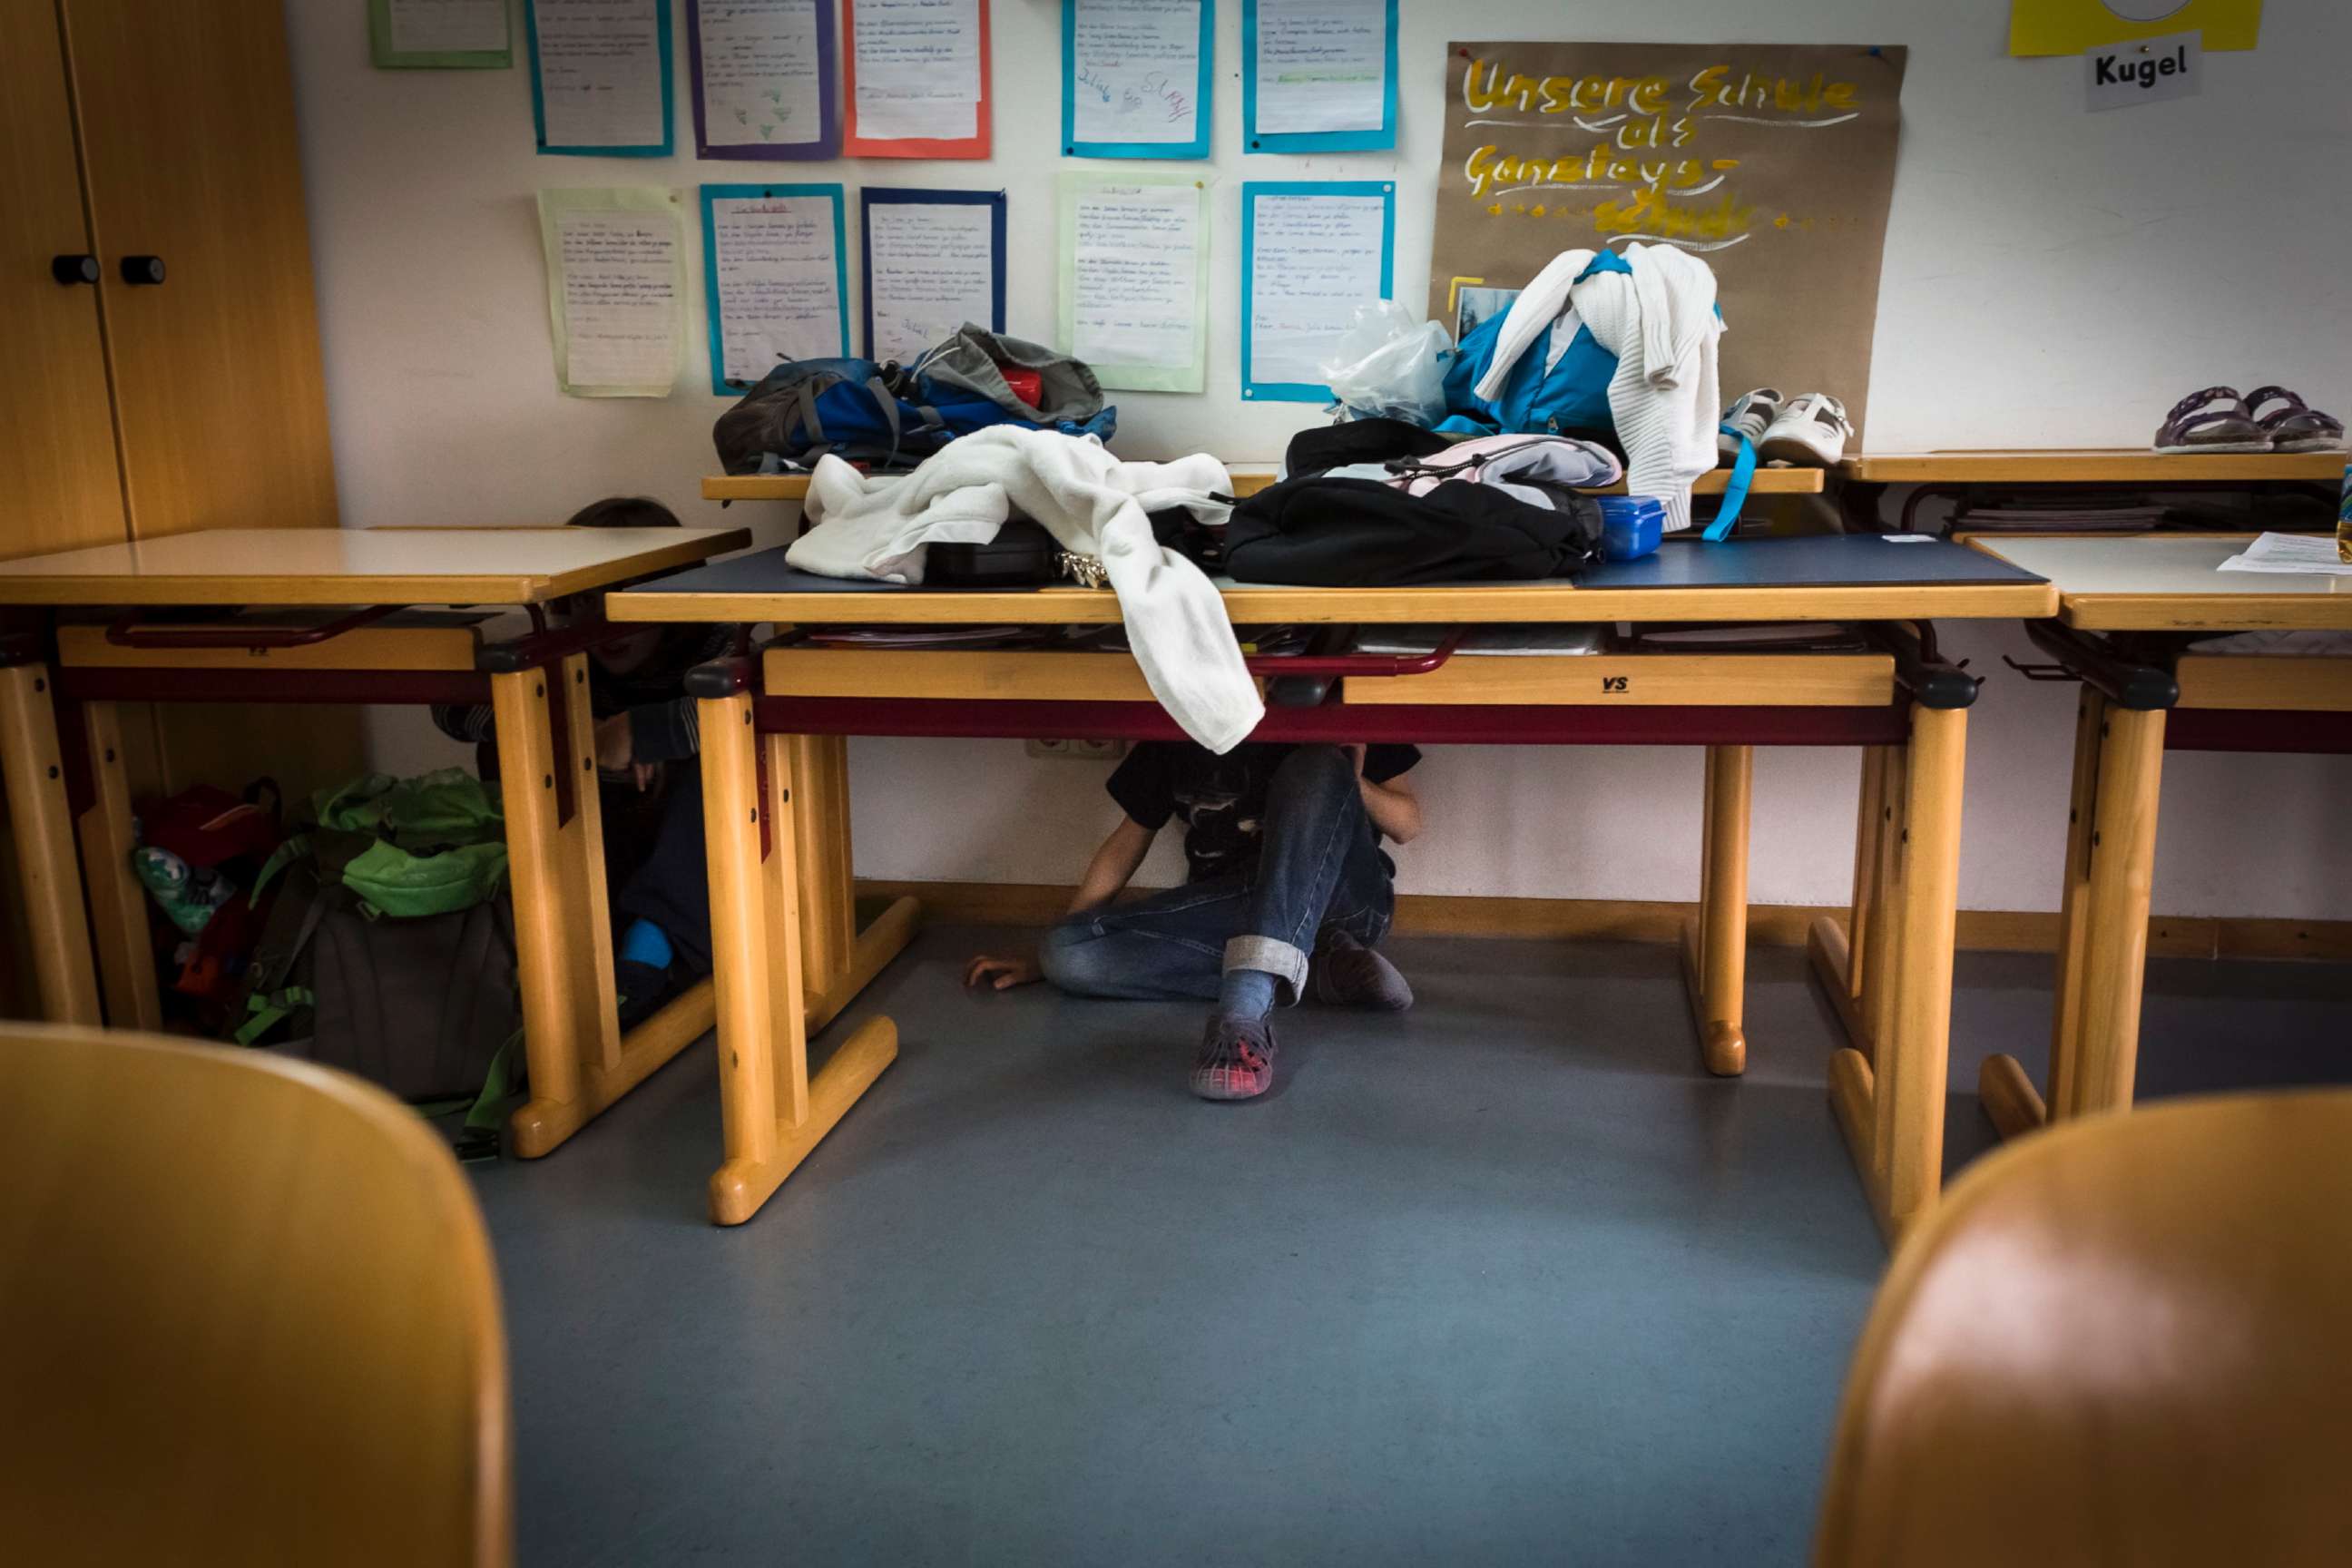 PHOTO: Elementary students cover under their desks during a drill in this undated photo.